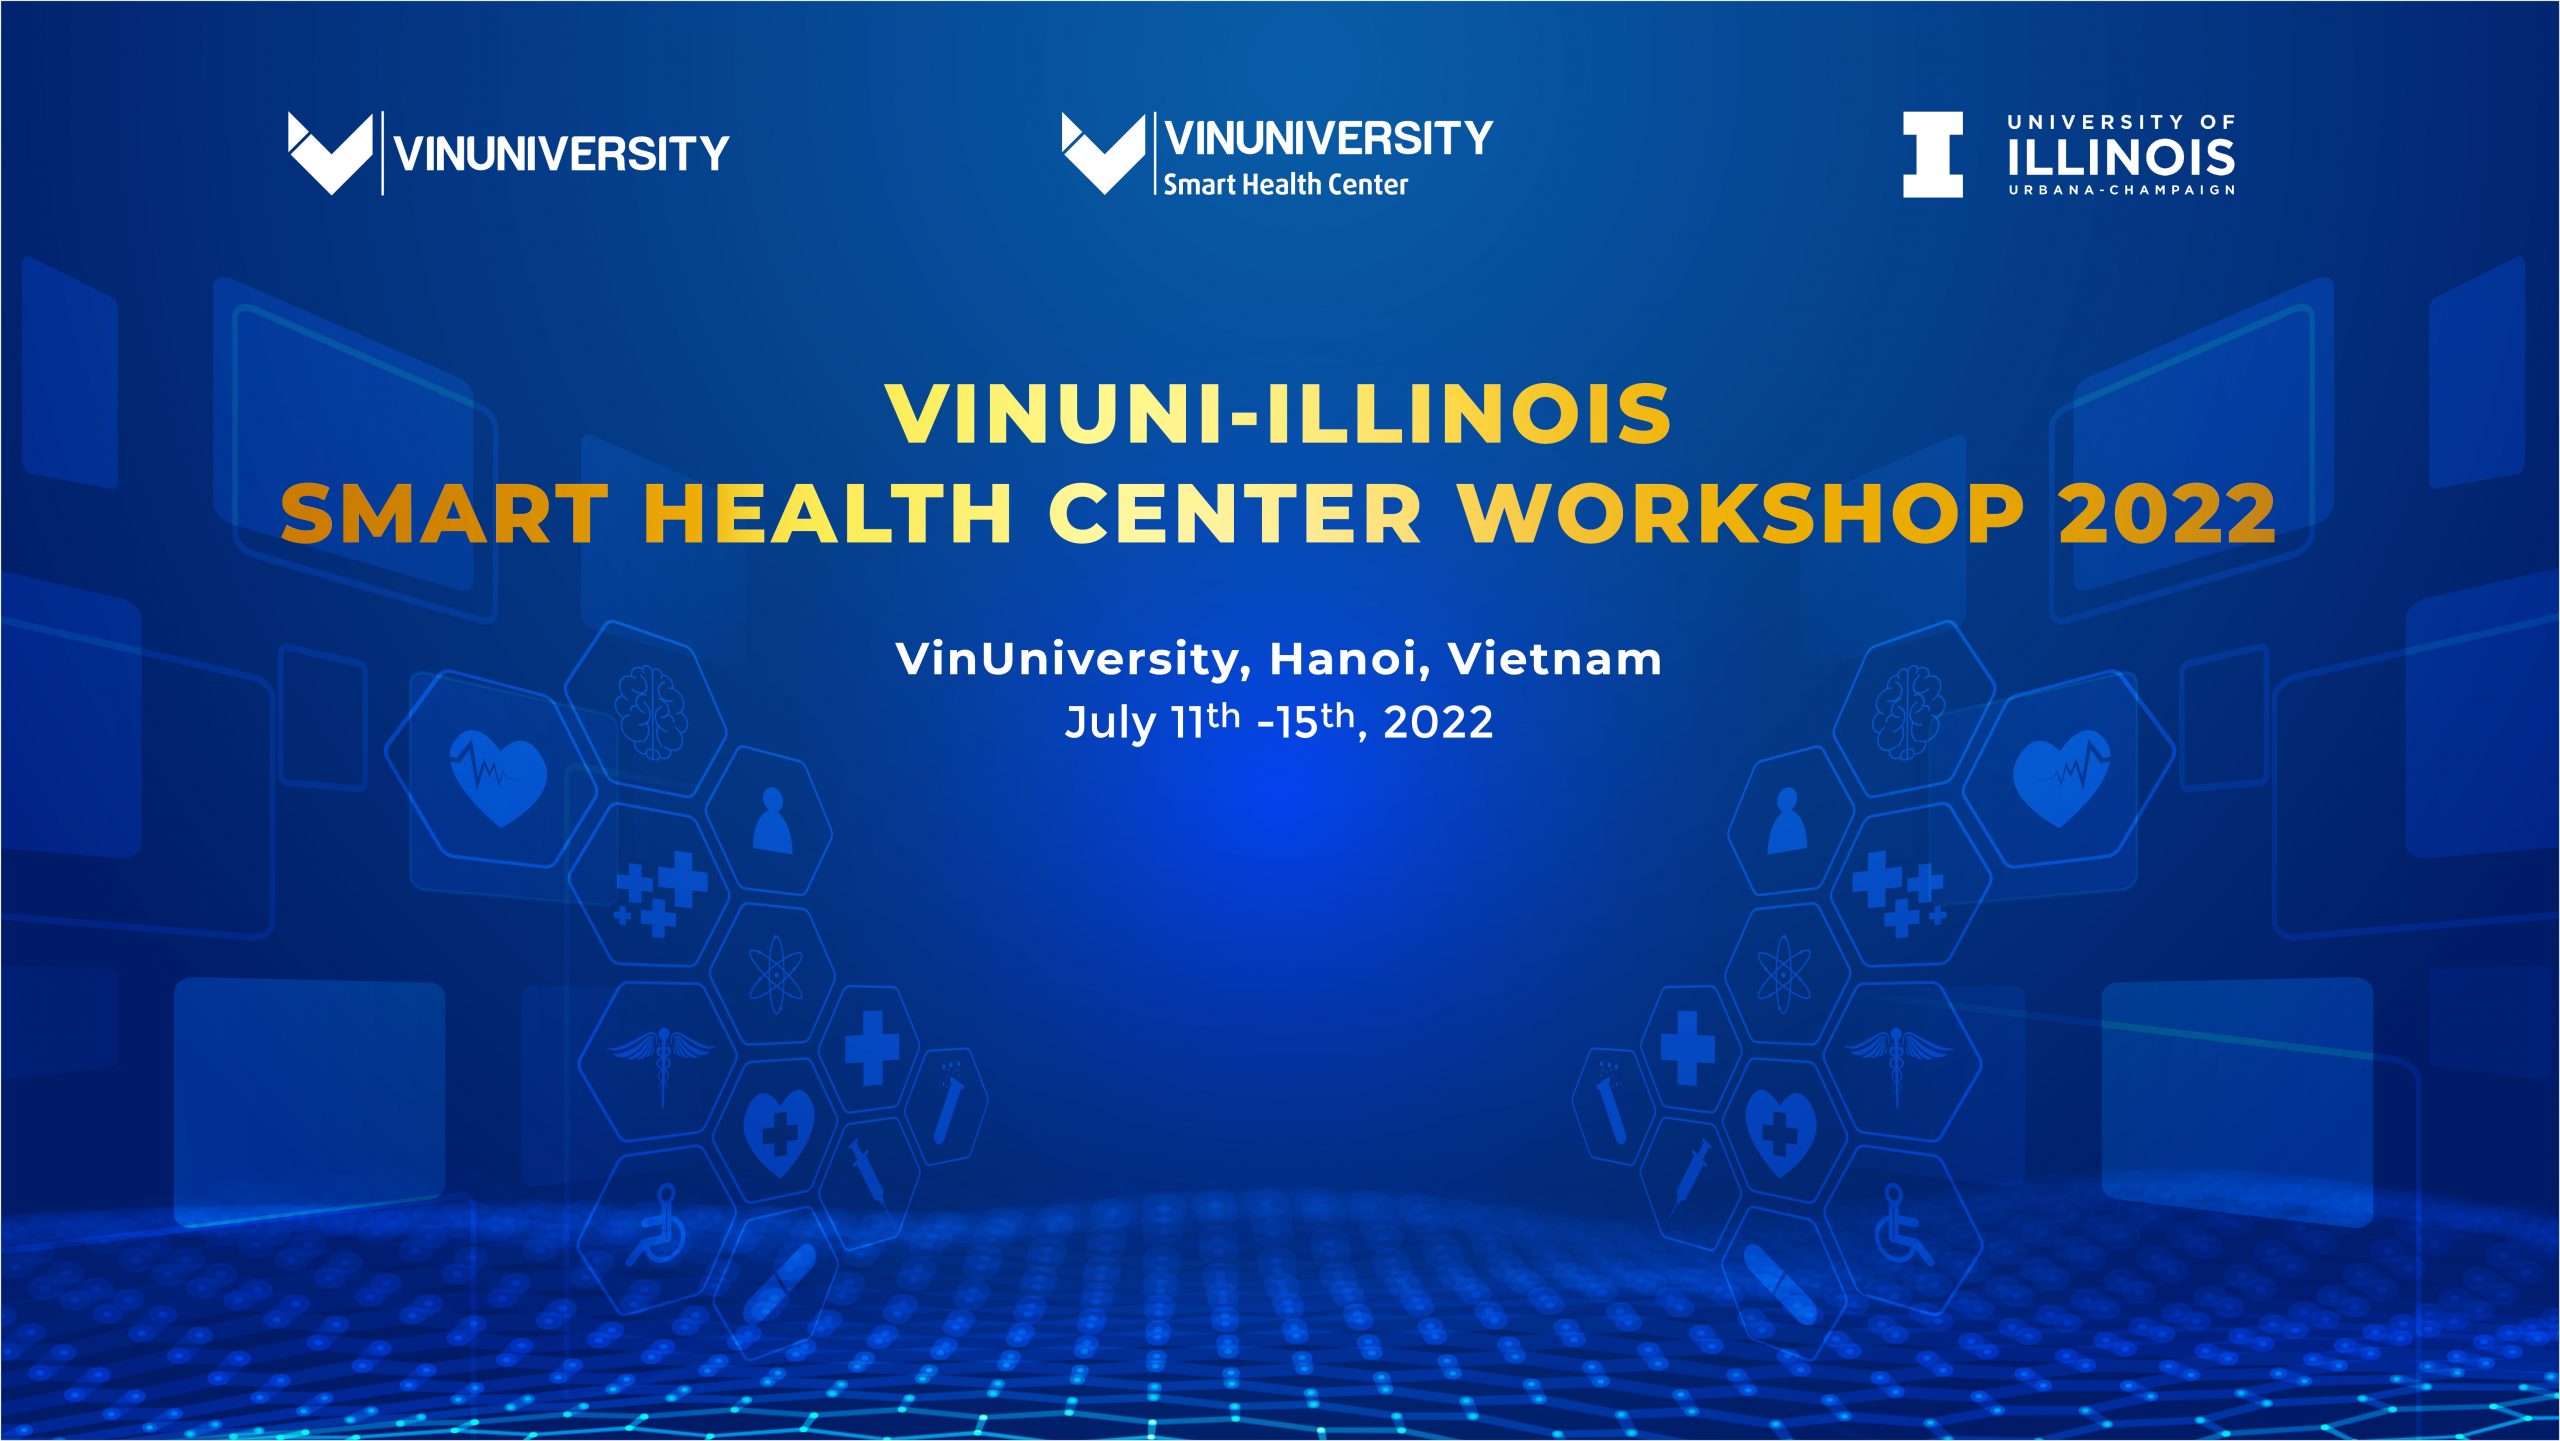 The First VinUni-Illinois Smart Health Center Workshop 11th-12th July 2022